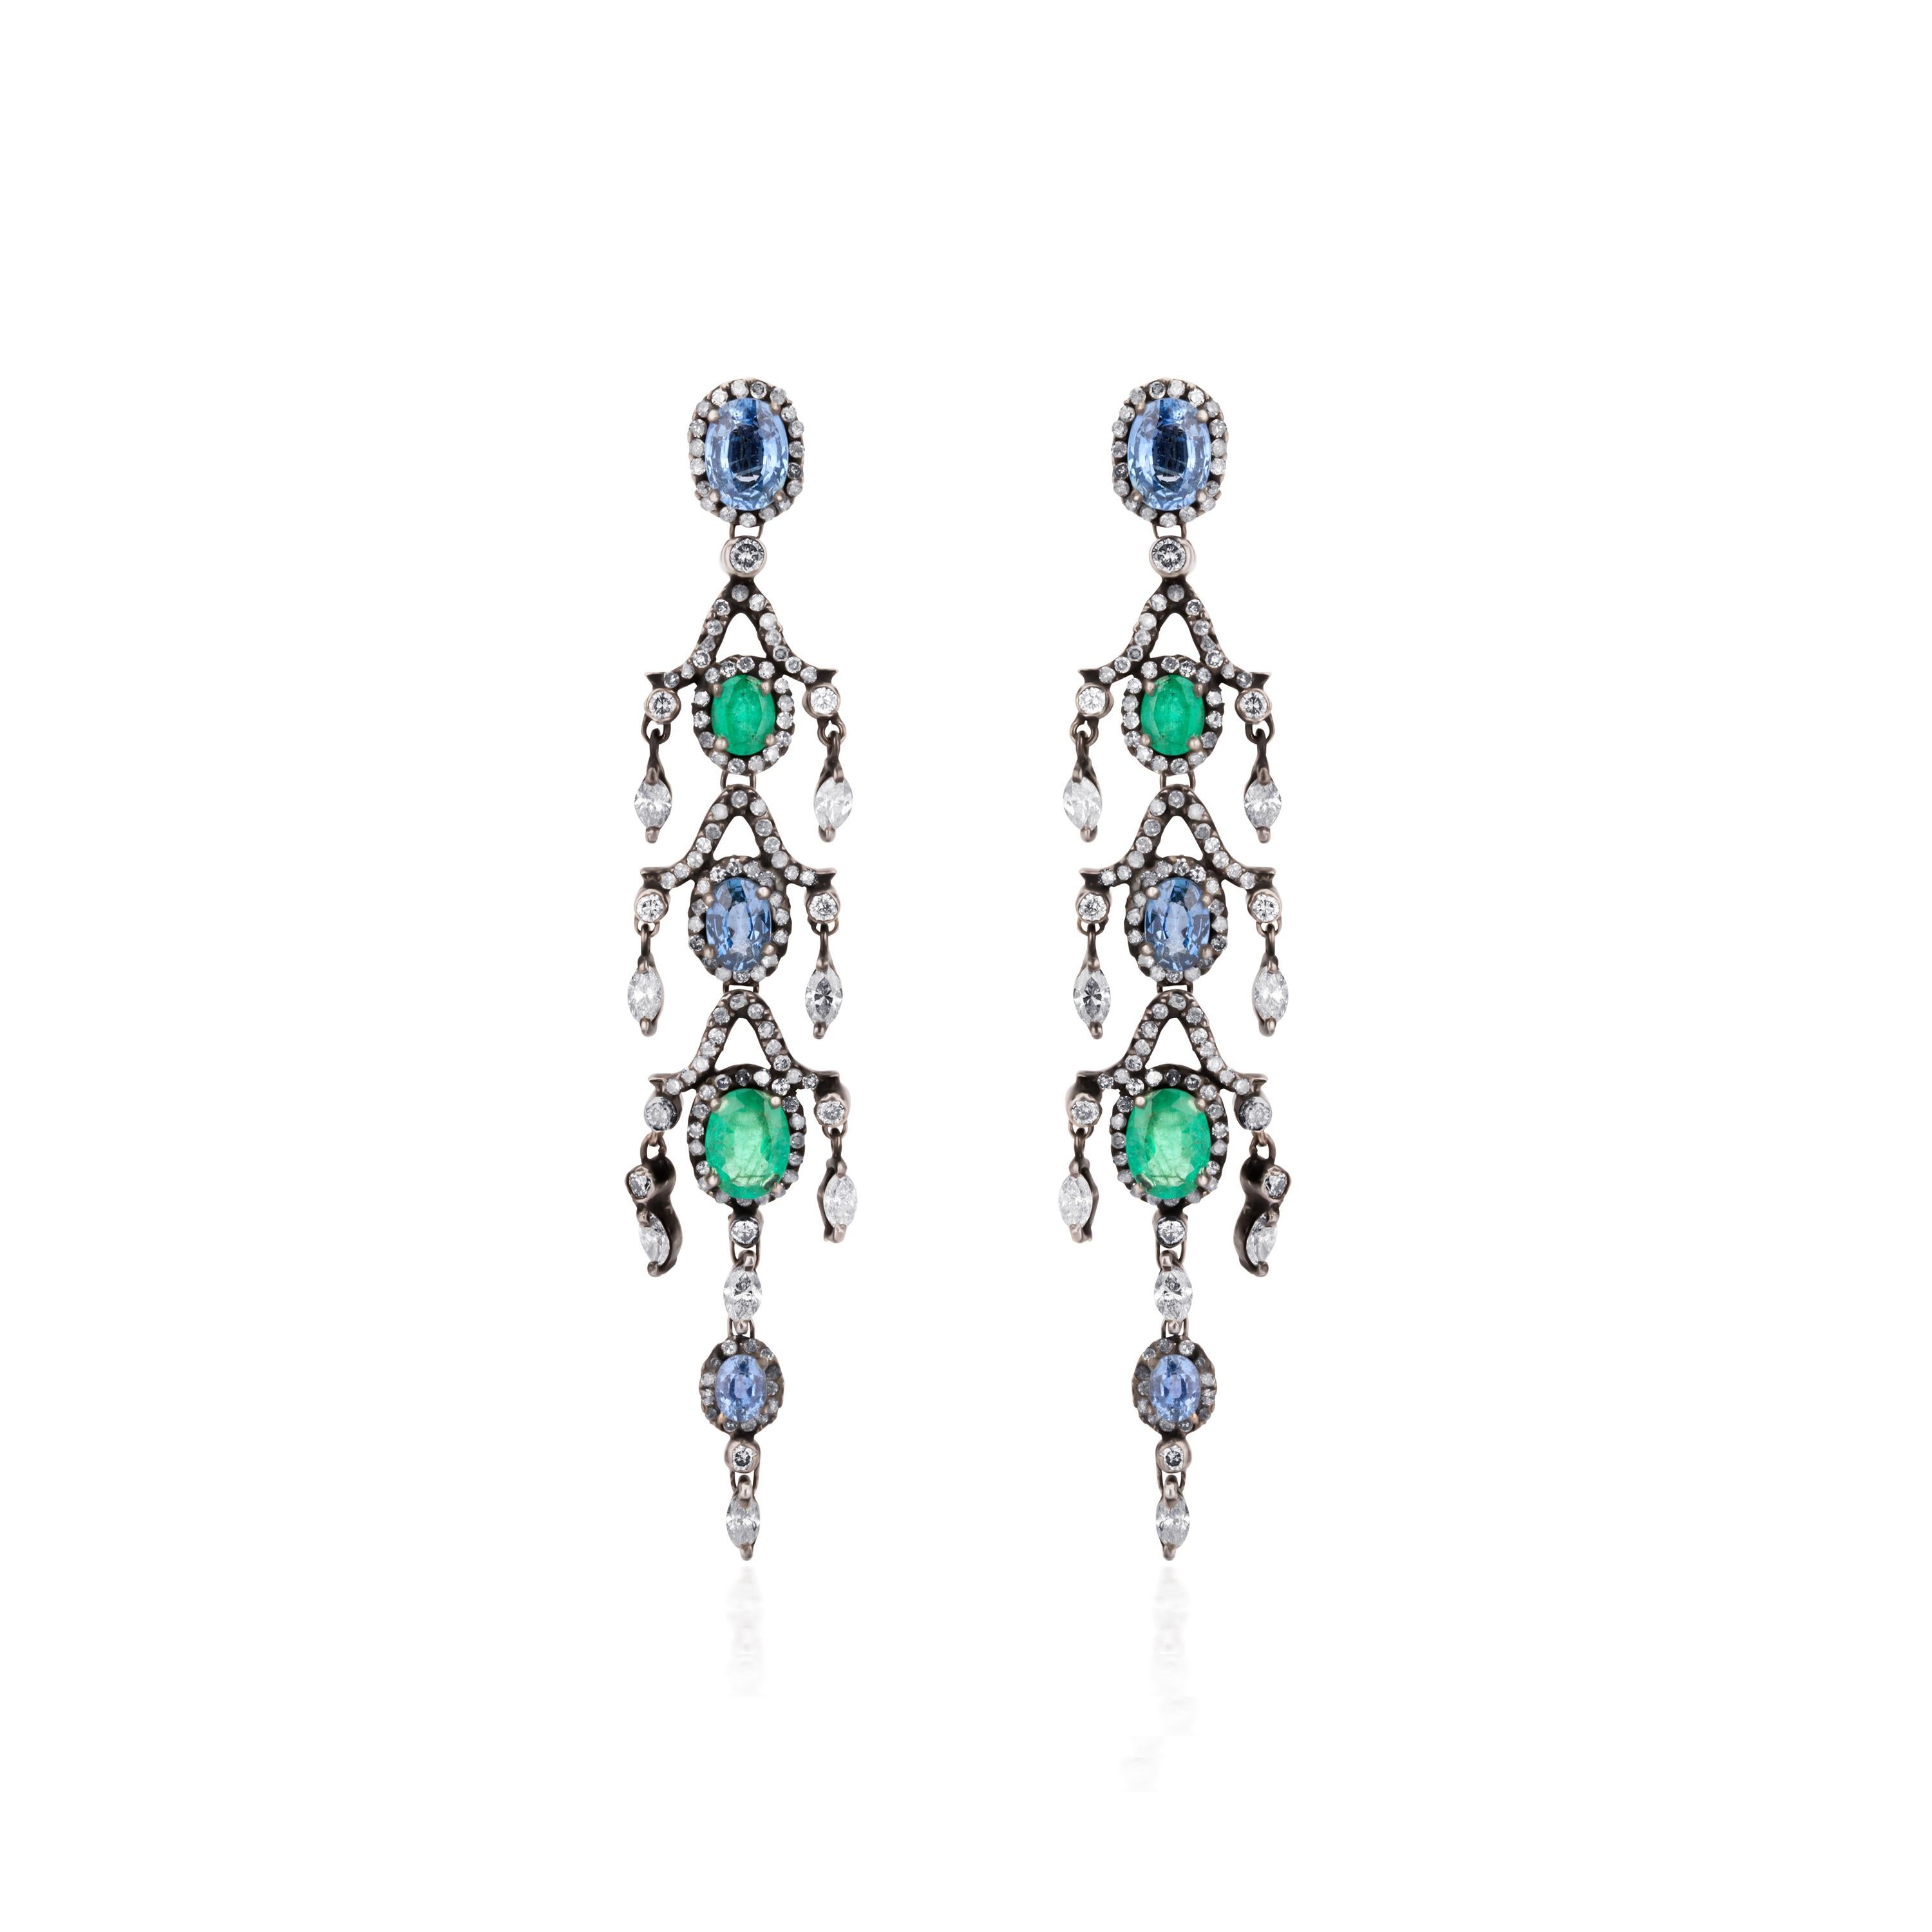 These lovely Victorian chandelier drop earrings, handcrafted in 18K gold and 925 sterling silver swing back and forth with your every move. Each earring features oval faceted emeralds and sapphires alternating with each other, embellished all around